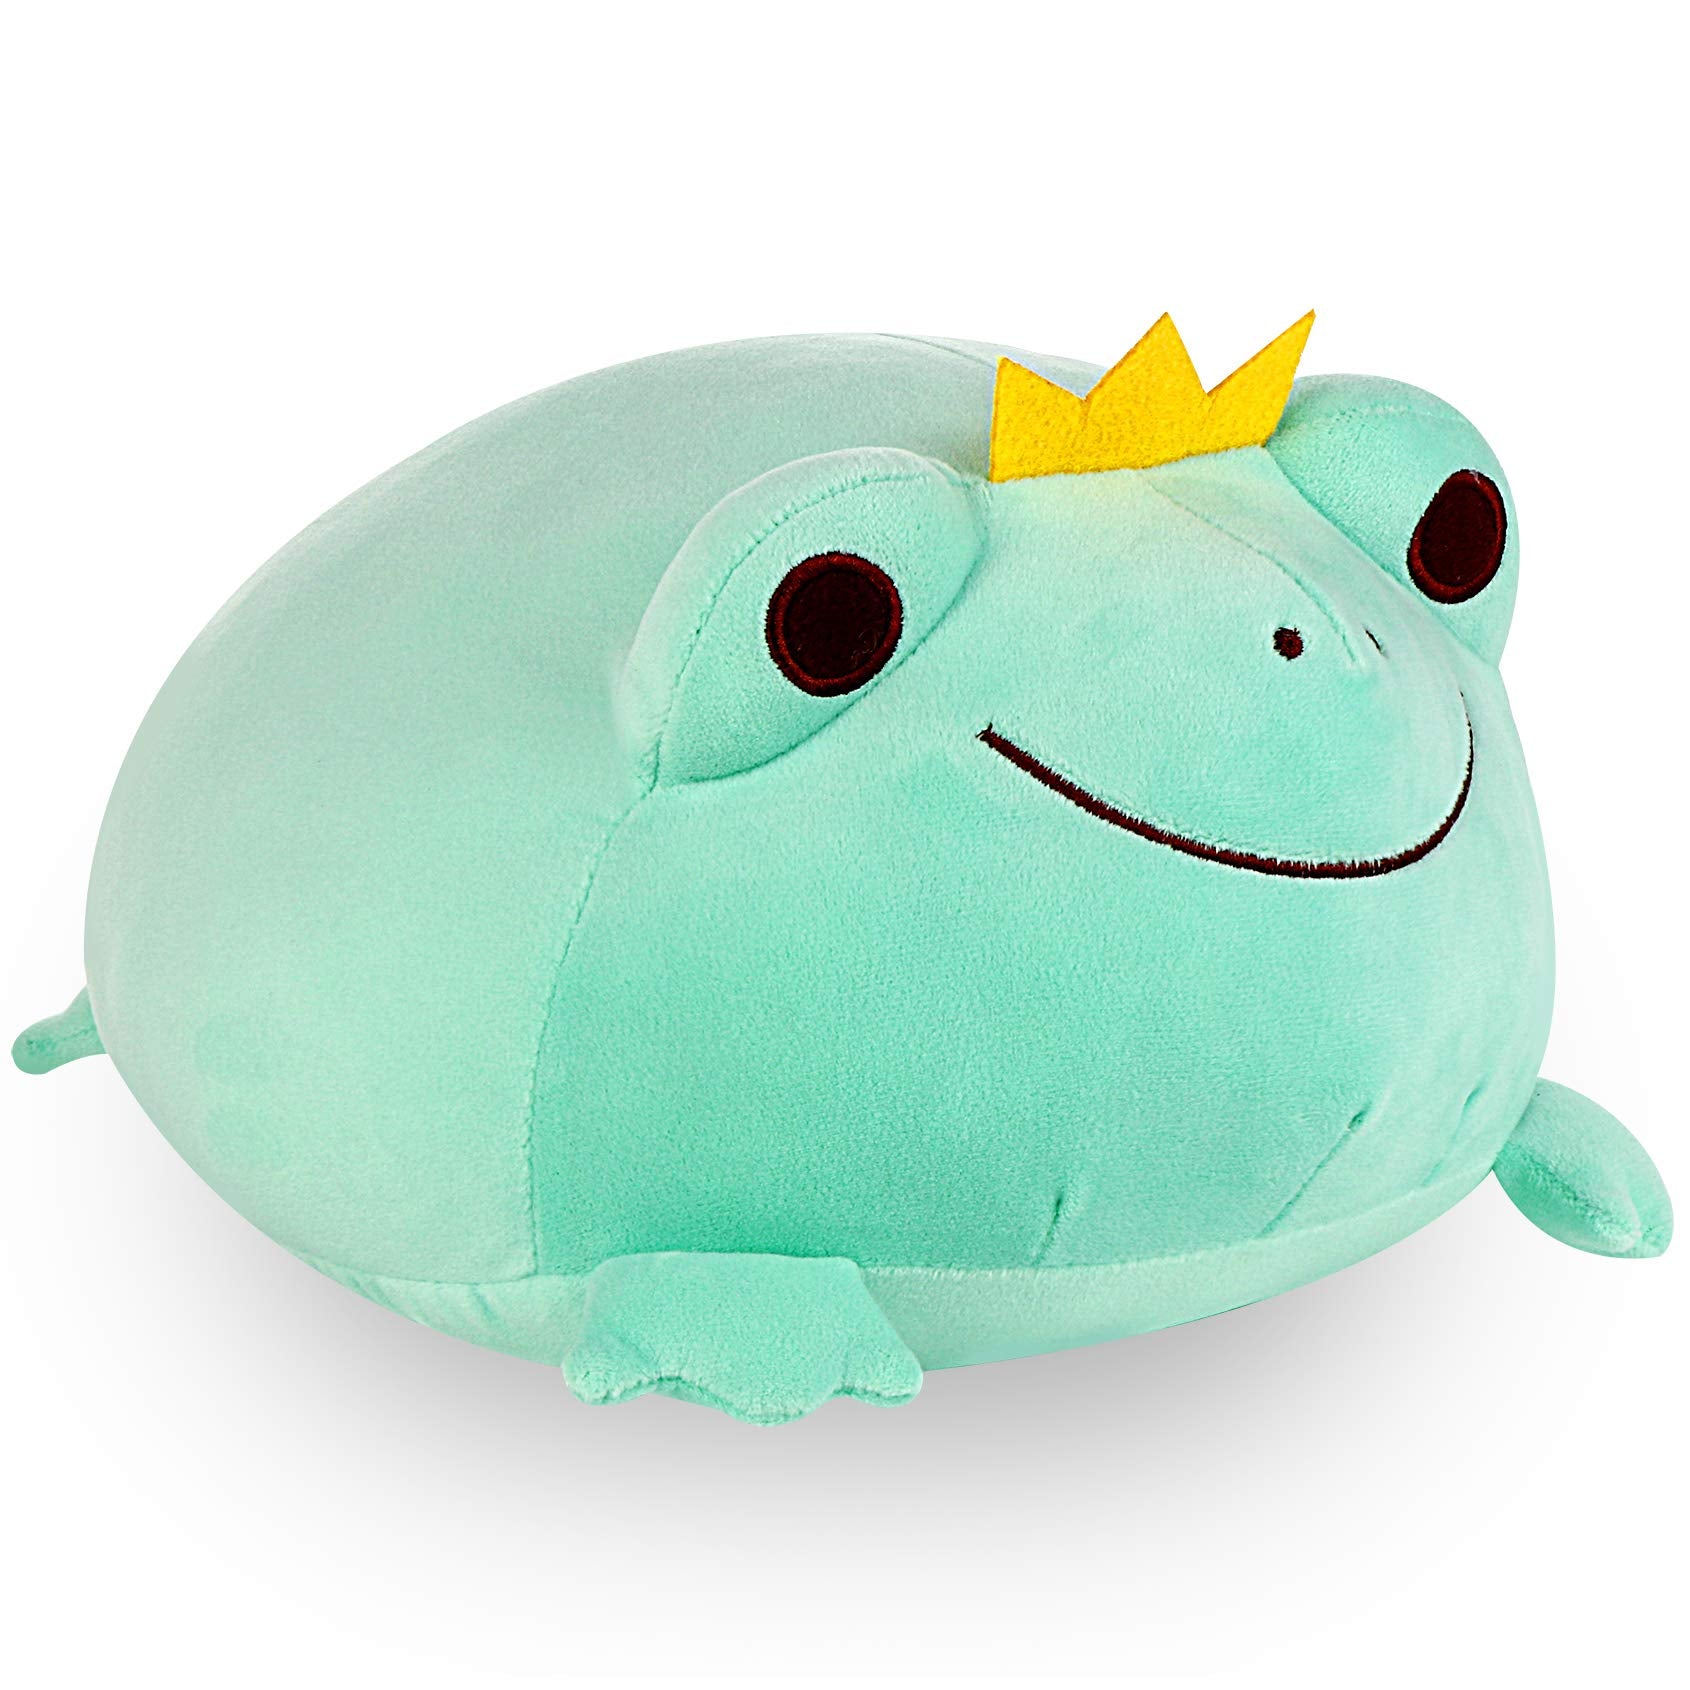 JUNERAIN Super Soft Frog Plush Stuffed Animal, Cute Frog Squishy Hugging Pillow, Adorable Frog Plushie Toy Gift for Kids Toddlers Children Girls Boys Baby, Cuddly Plush Frog Decoration, 35cm